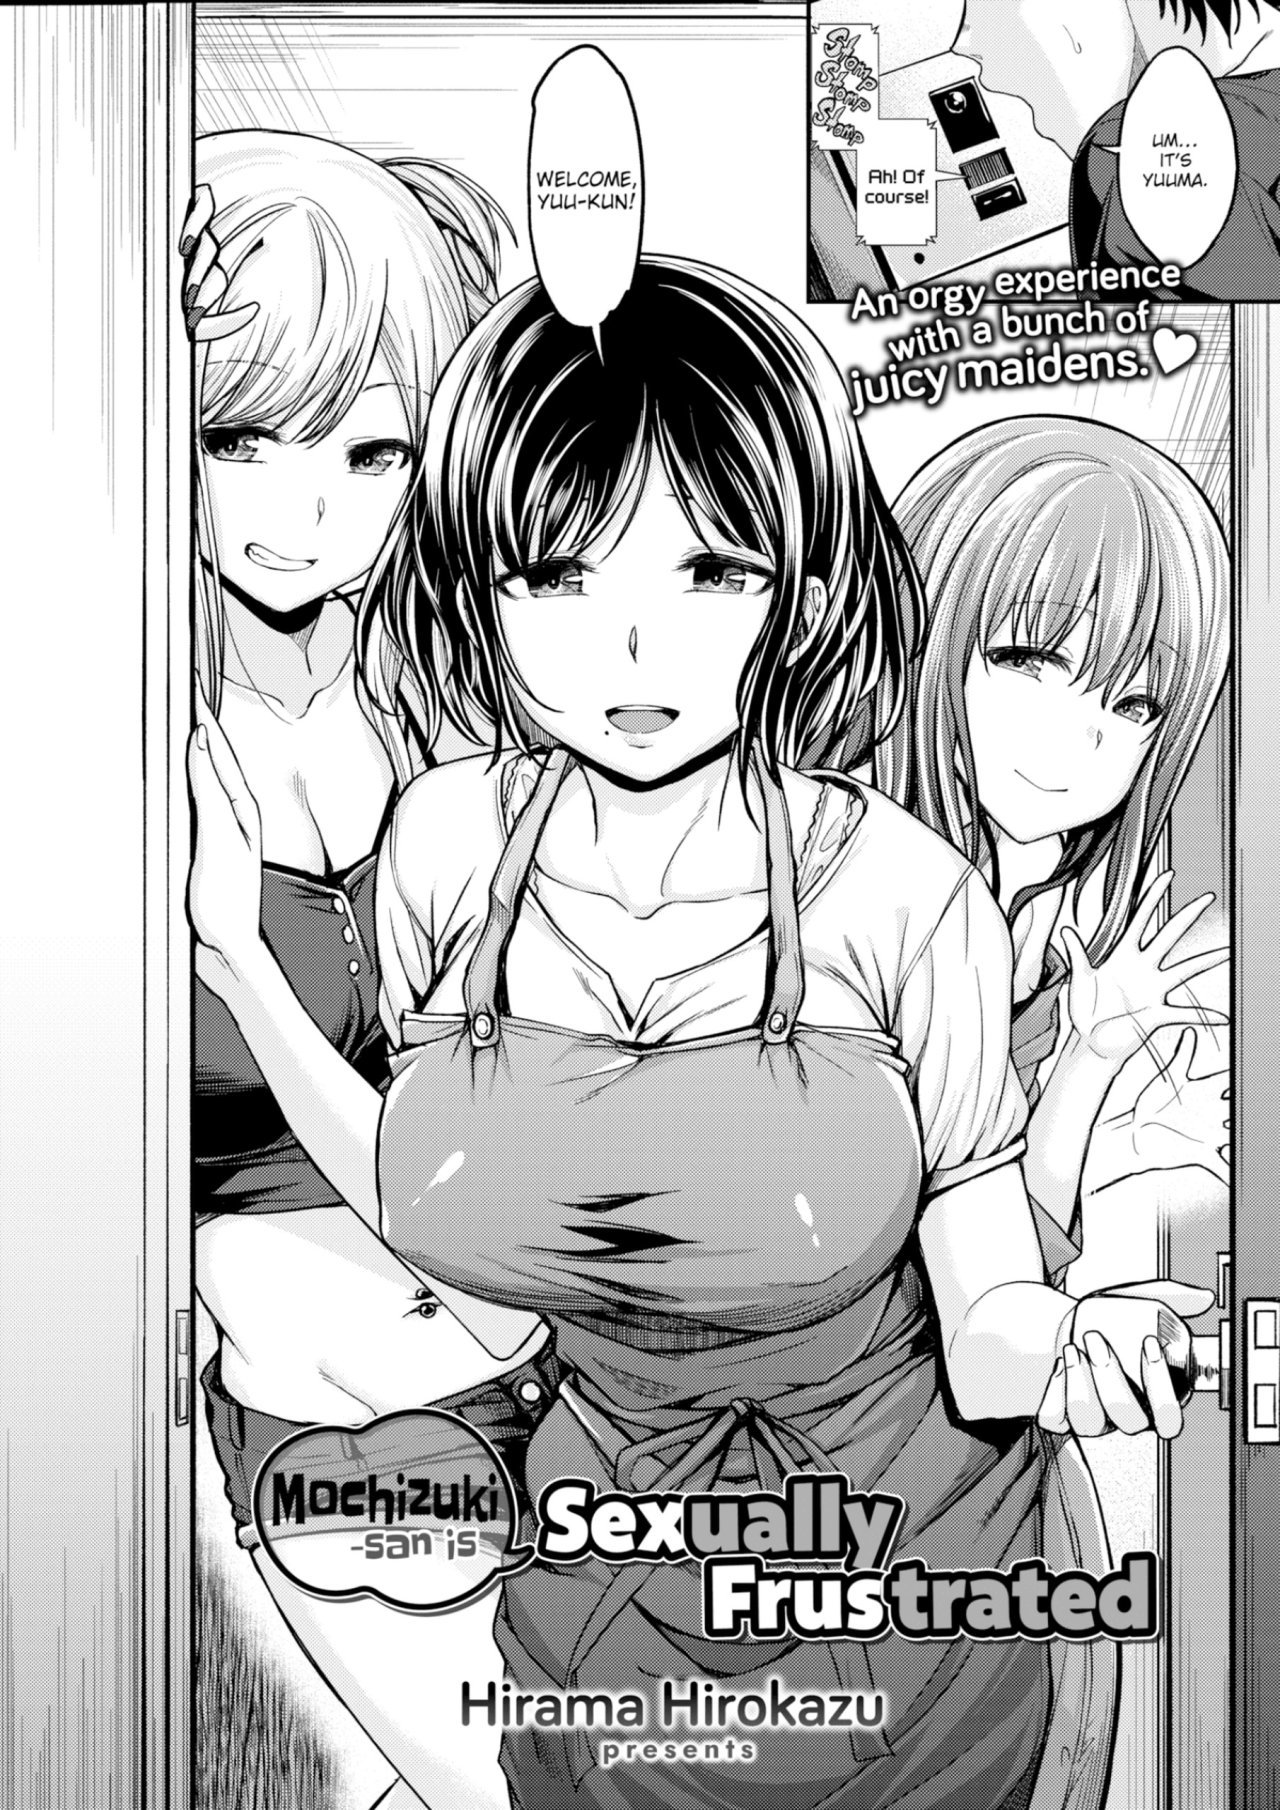 Mochizuki-san is Sexually Frustrated - 1